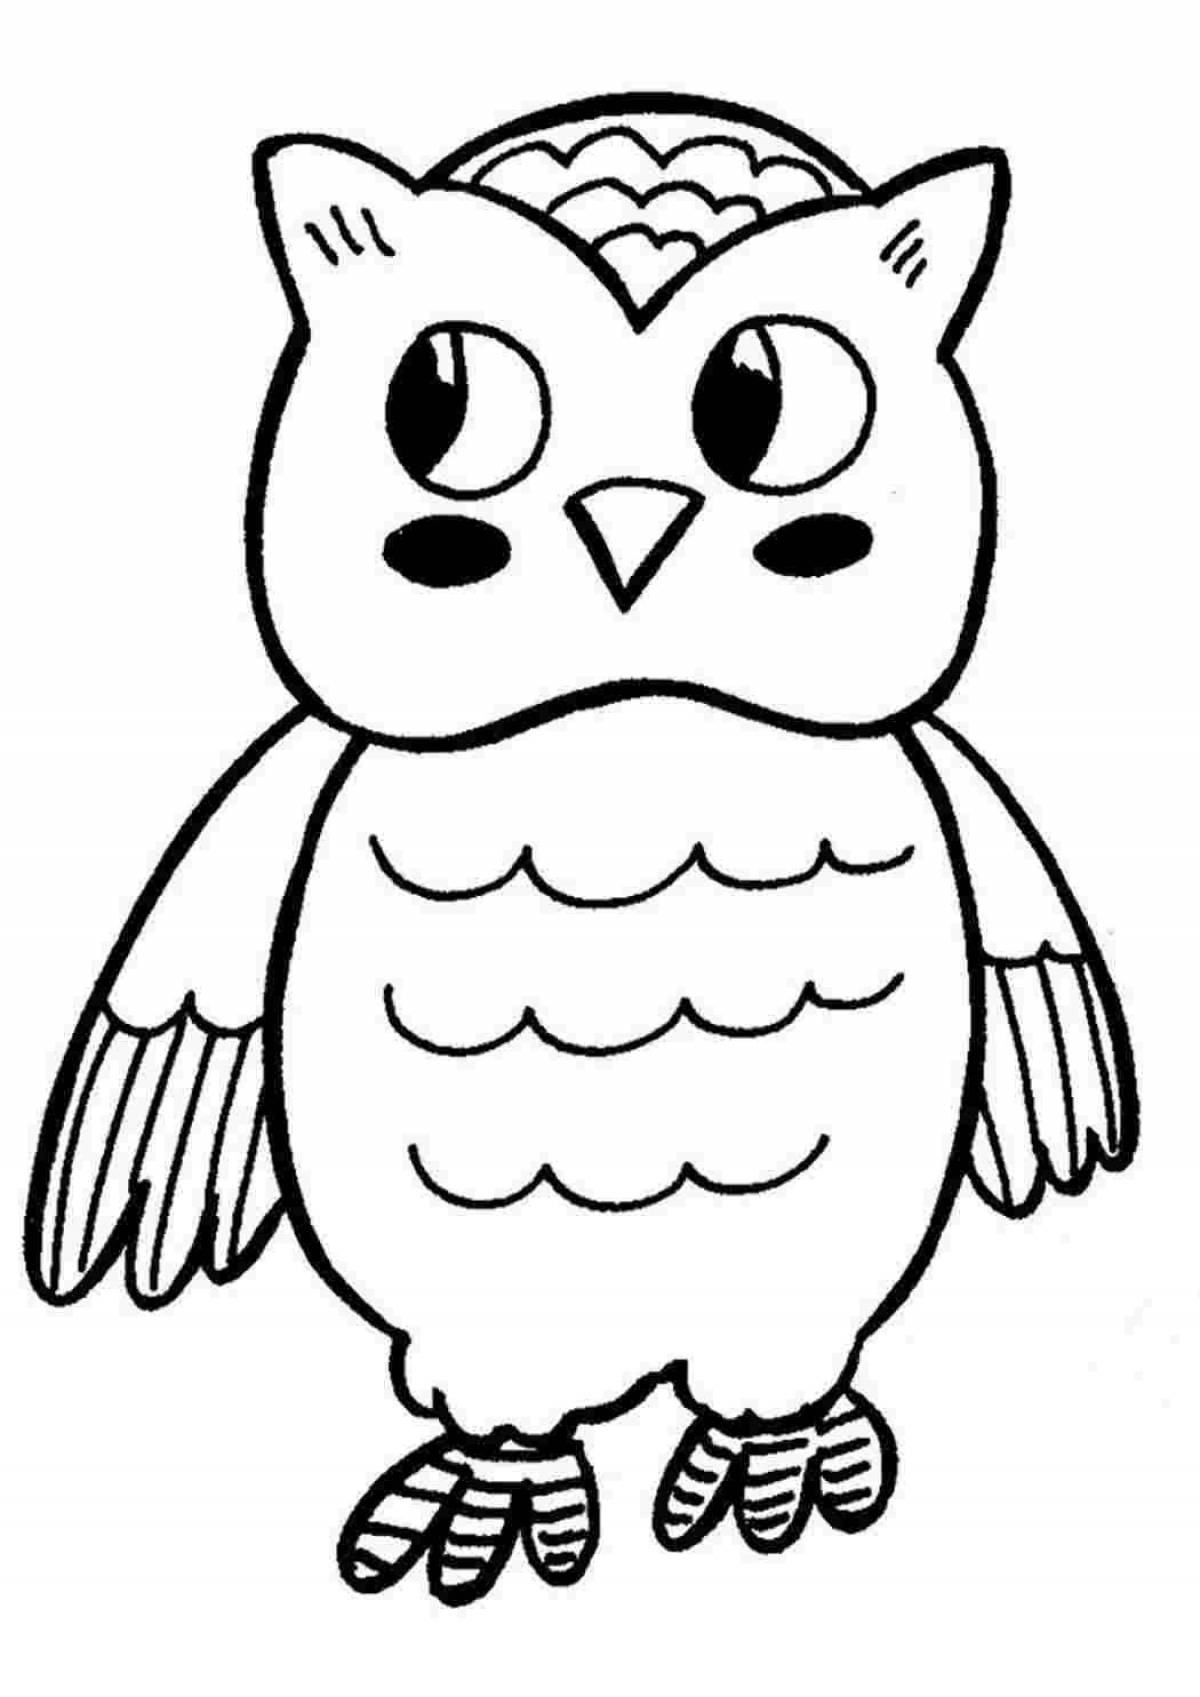 Colouring awesome owl